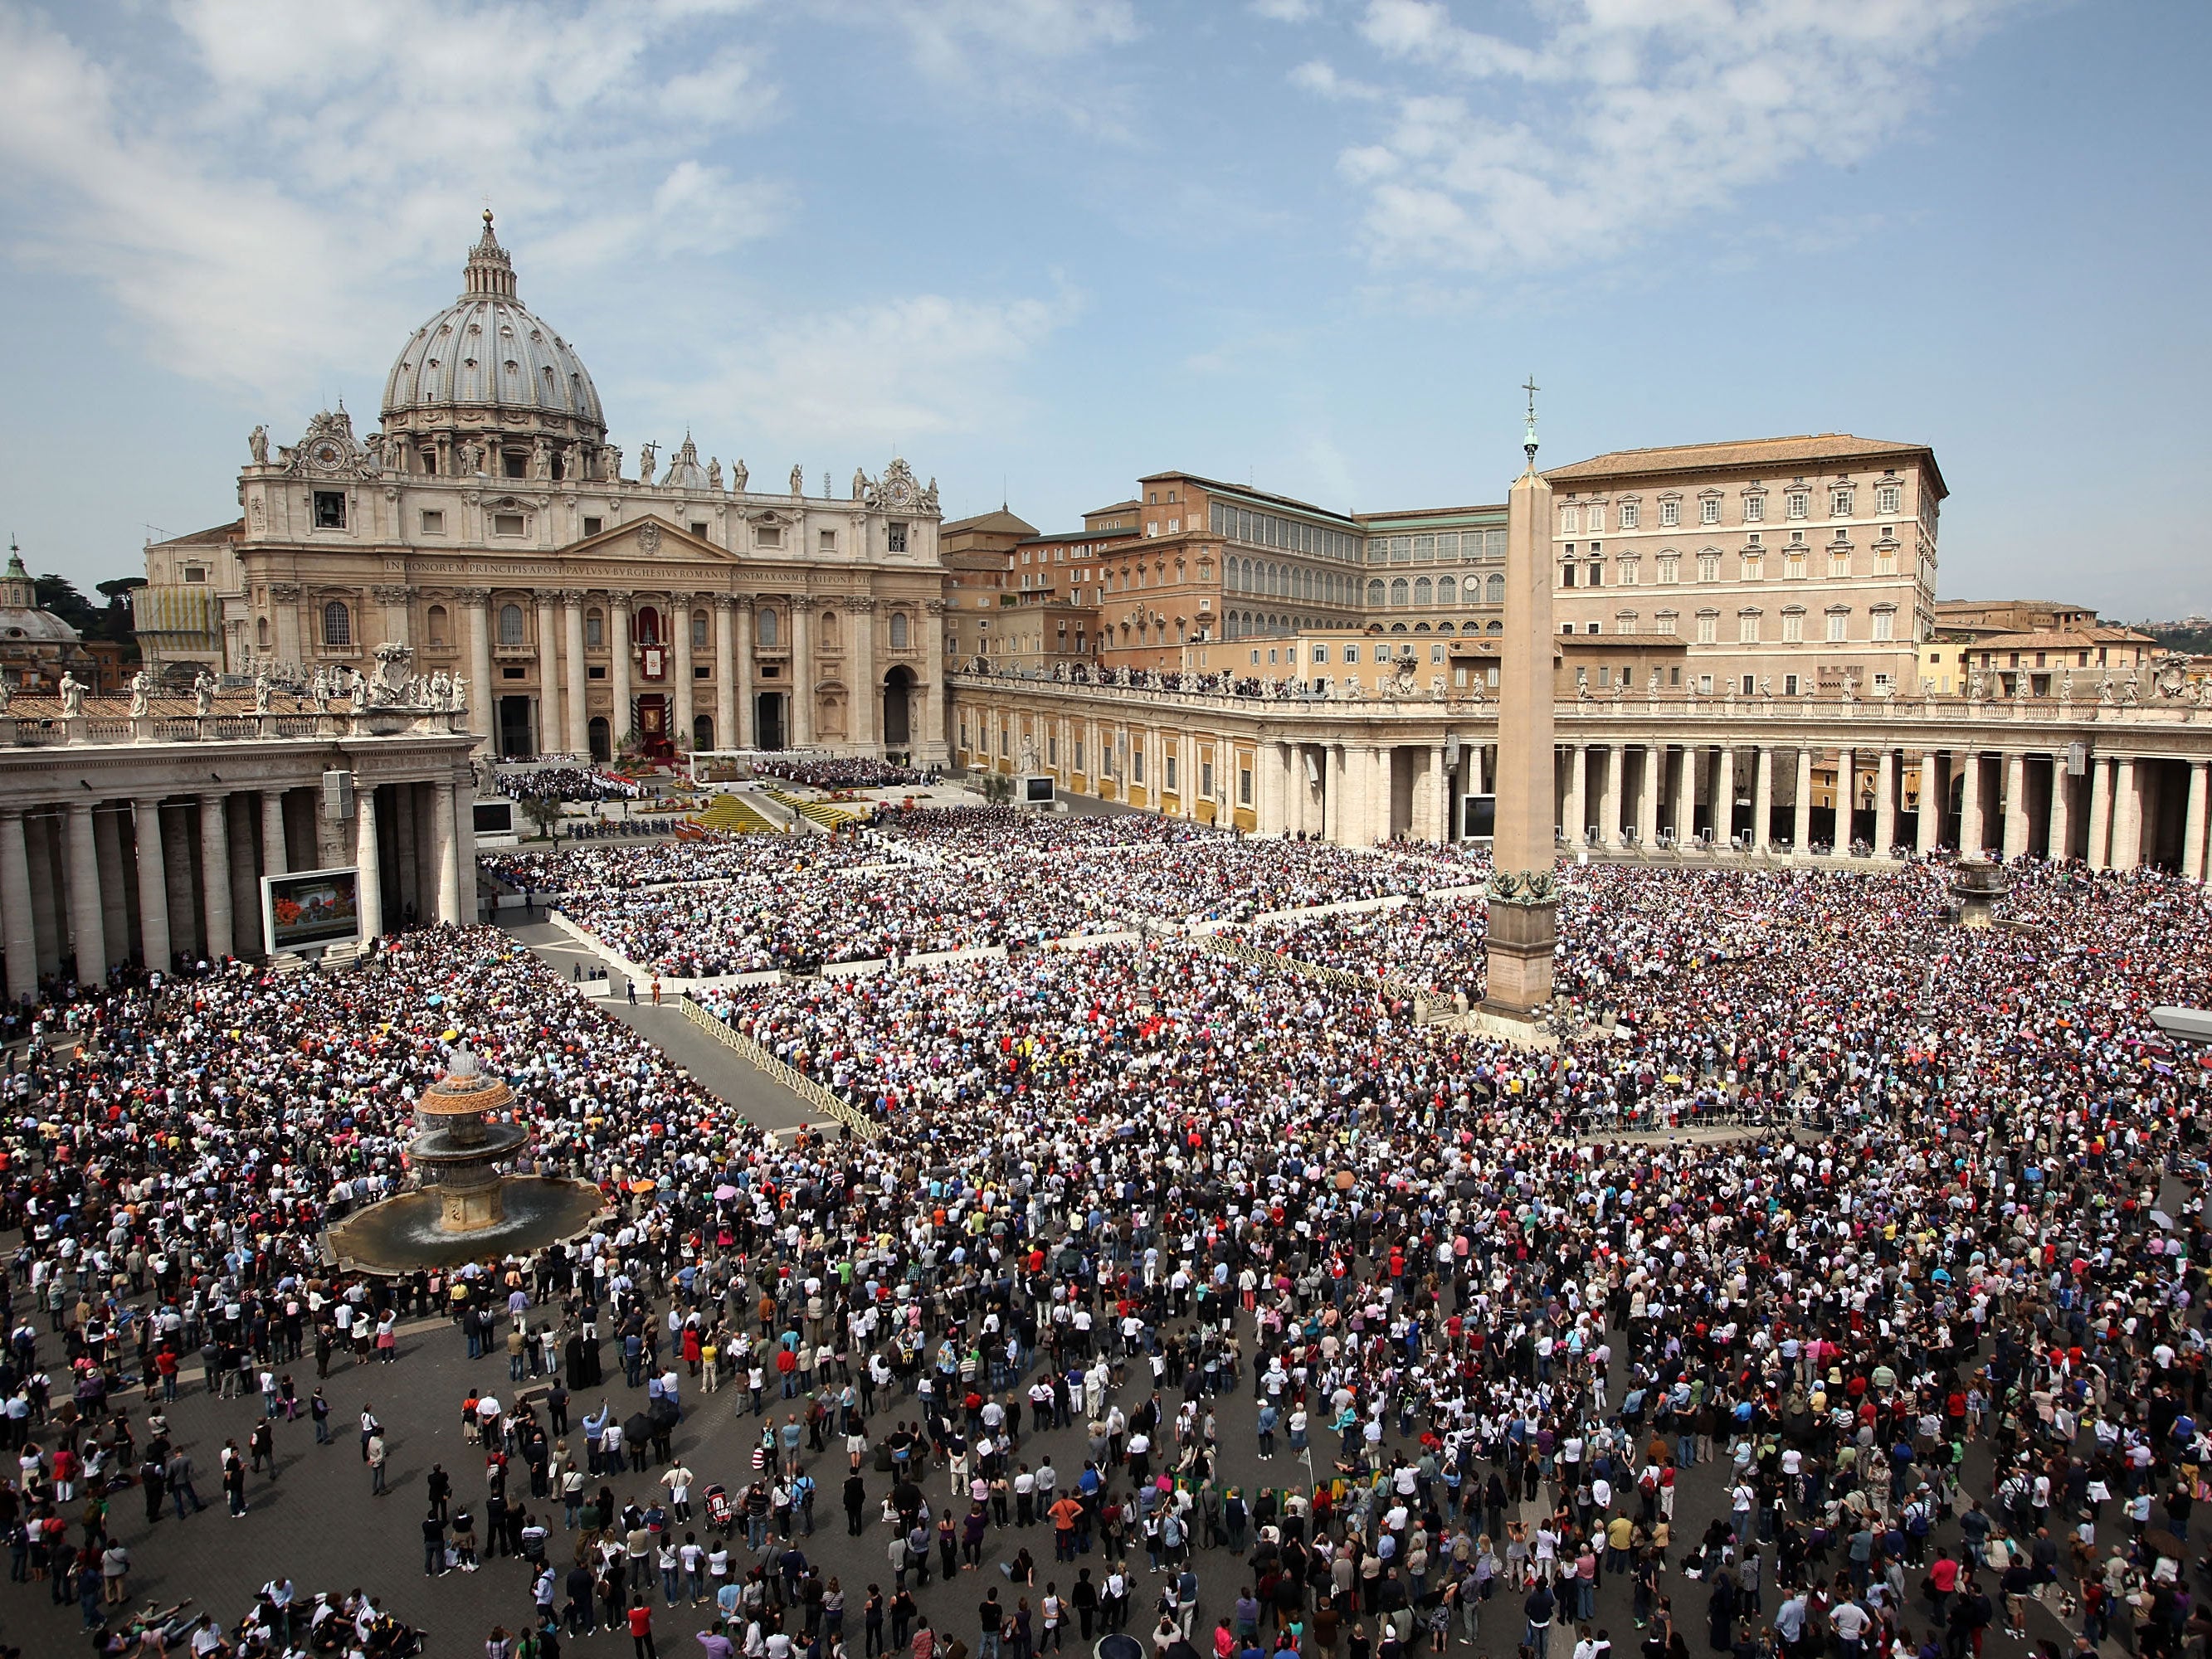 Catholics gather in St Peter's Square during Easter Mass